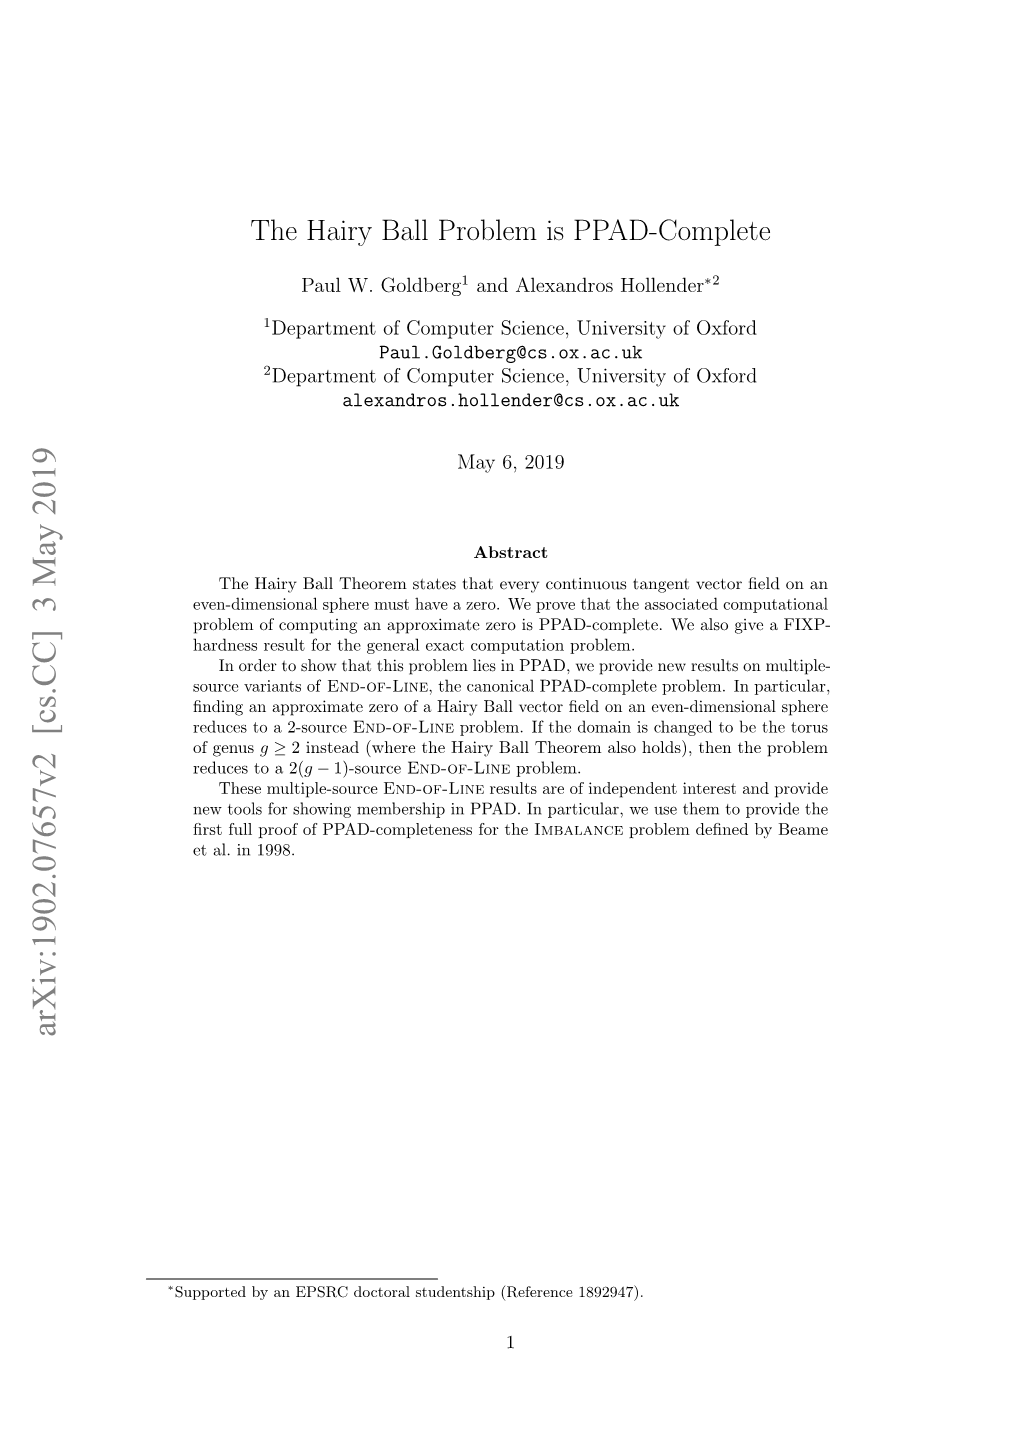 The Hairy Ball Problem Is PPAD-Complete